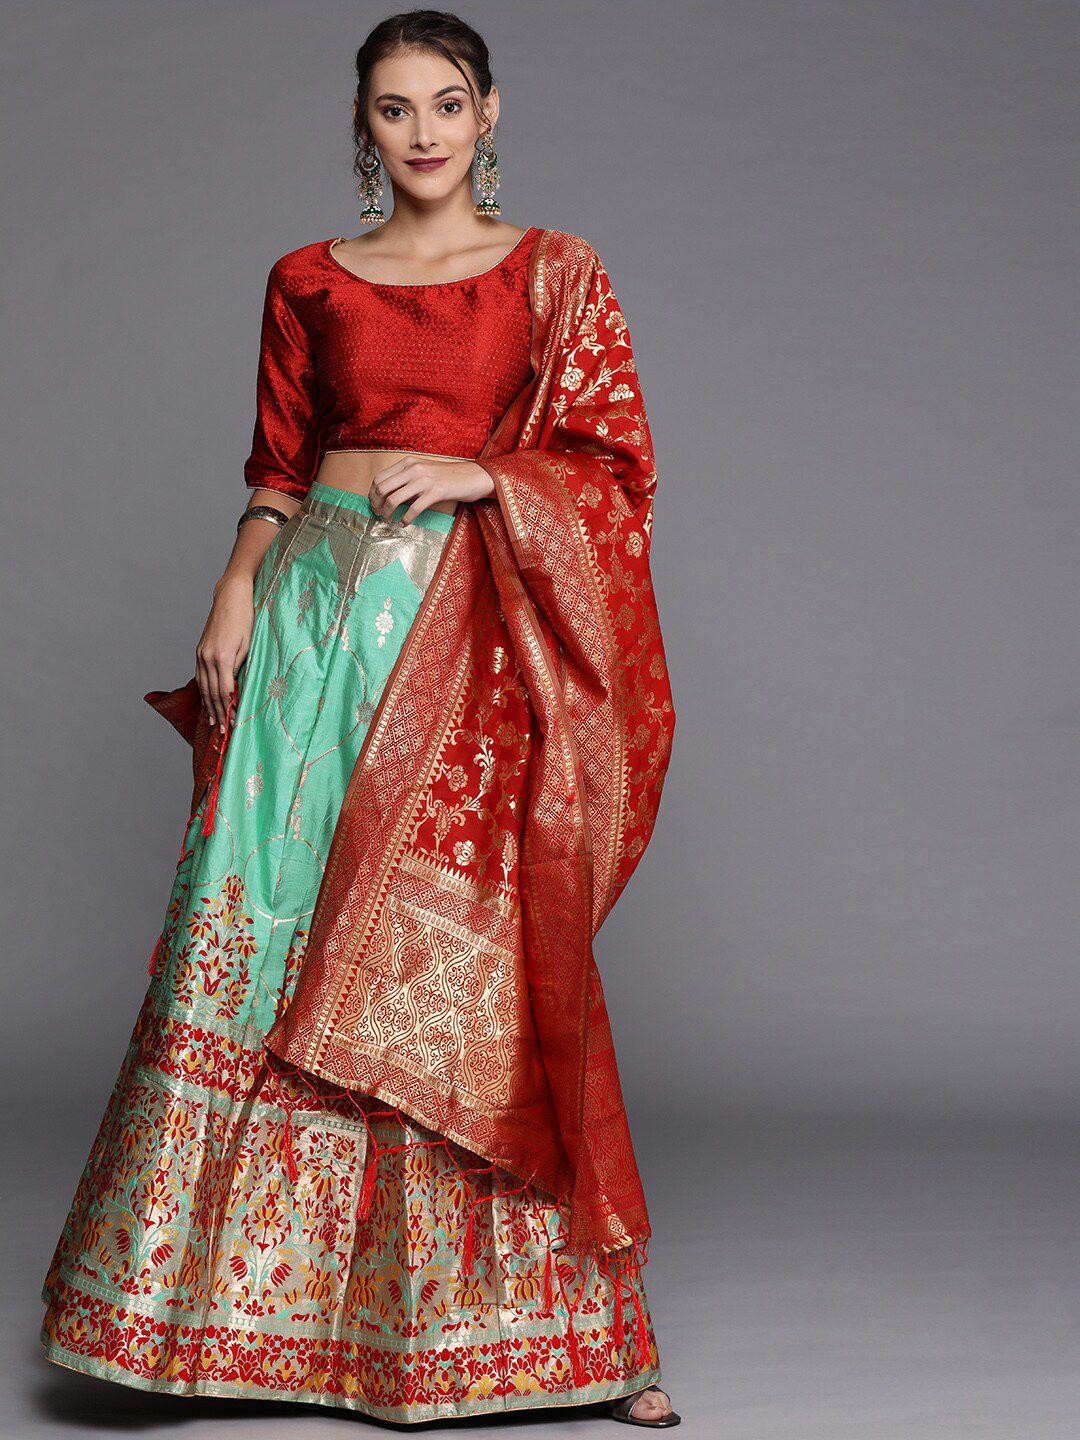 manvaa-green-&-red-semi-stitched-lehenga-&-unstitched-blouse-with-dupatta